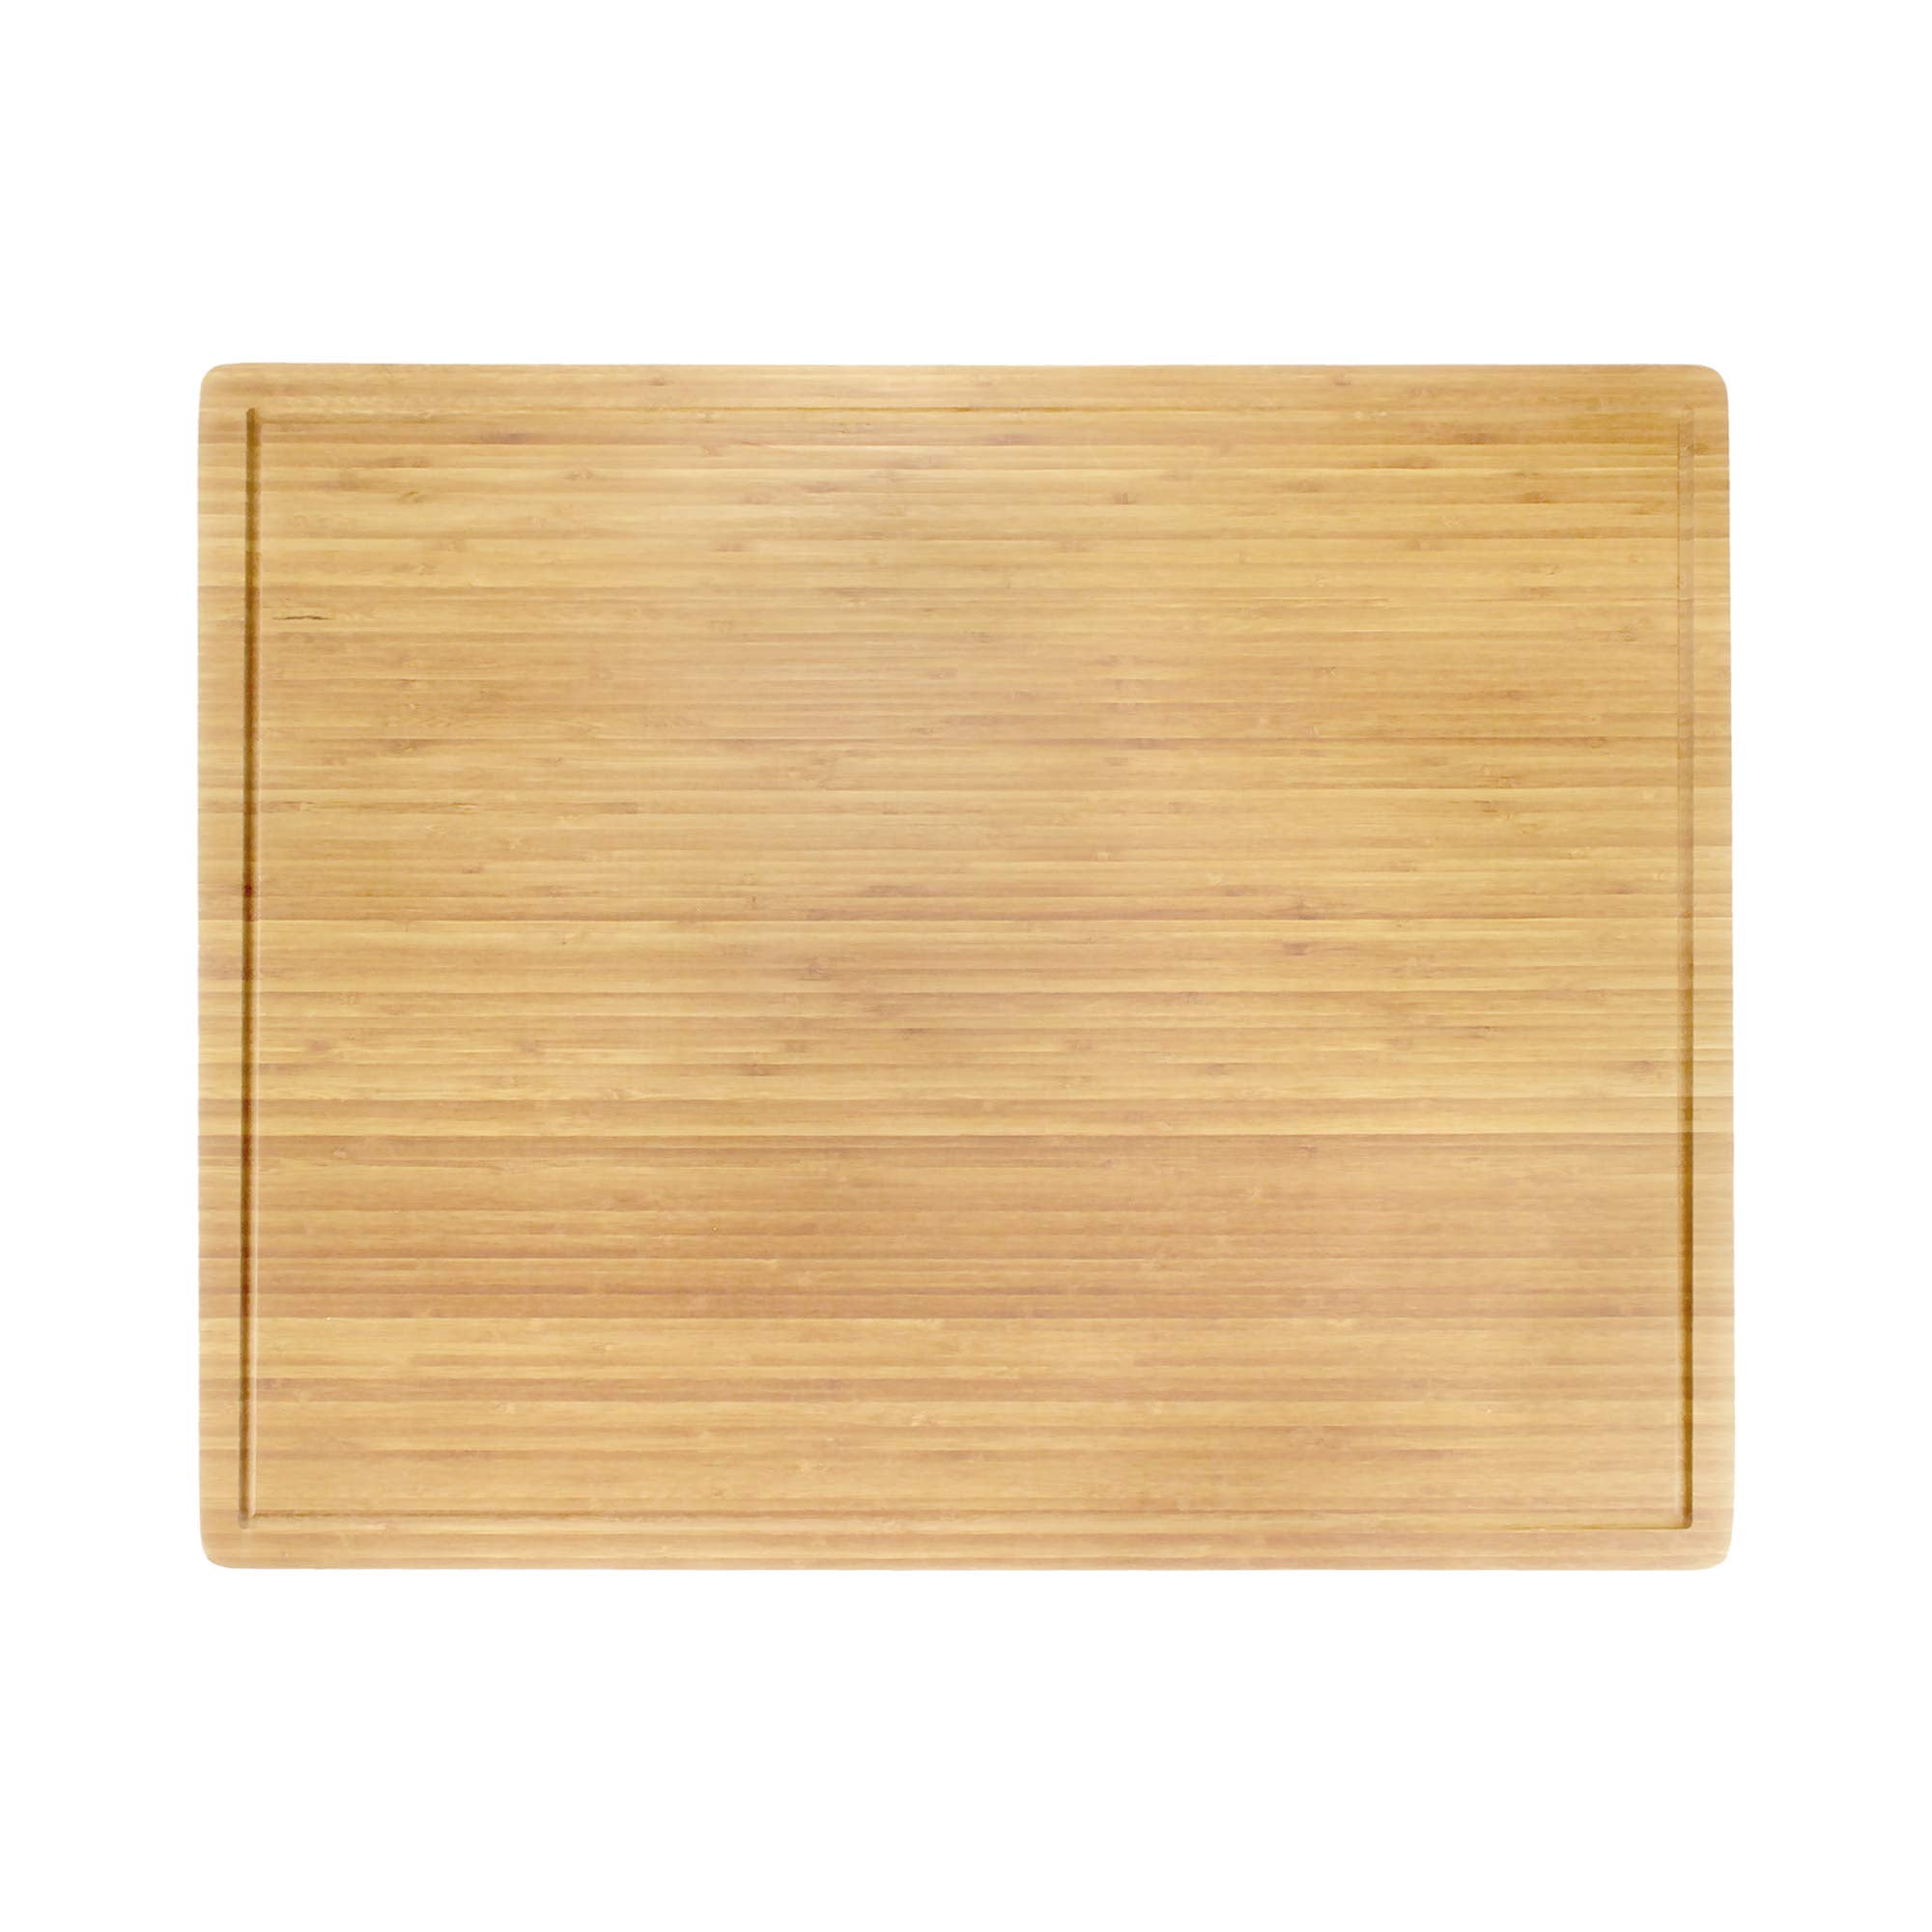 The Stovetop Cutting Board/Cover